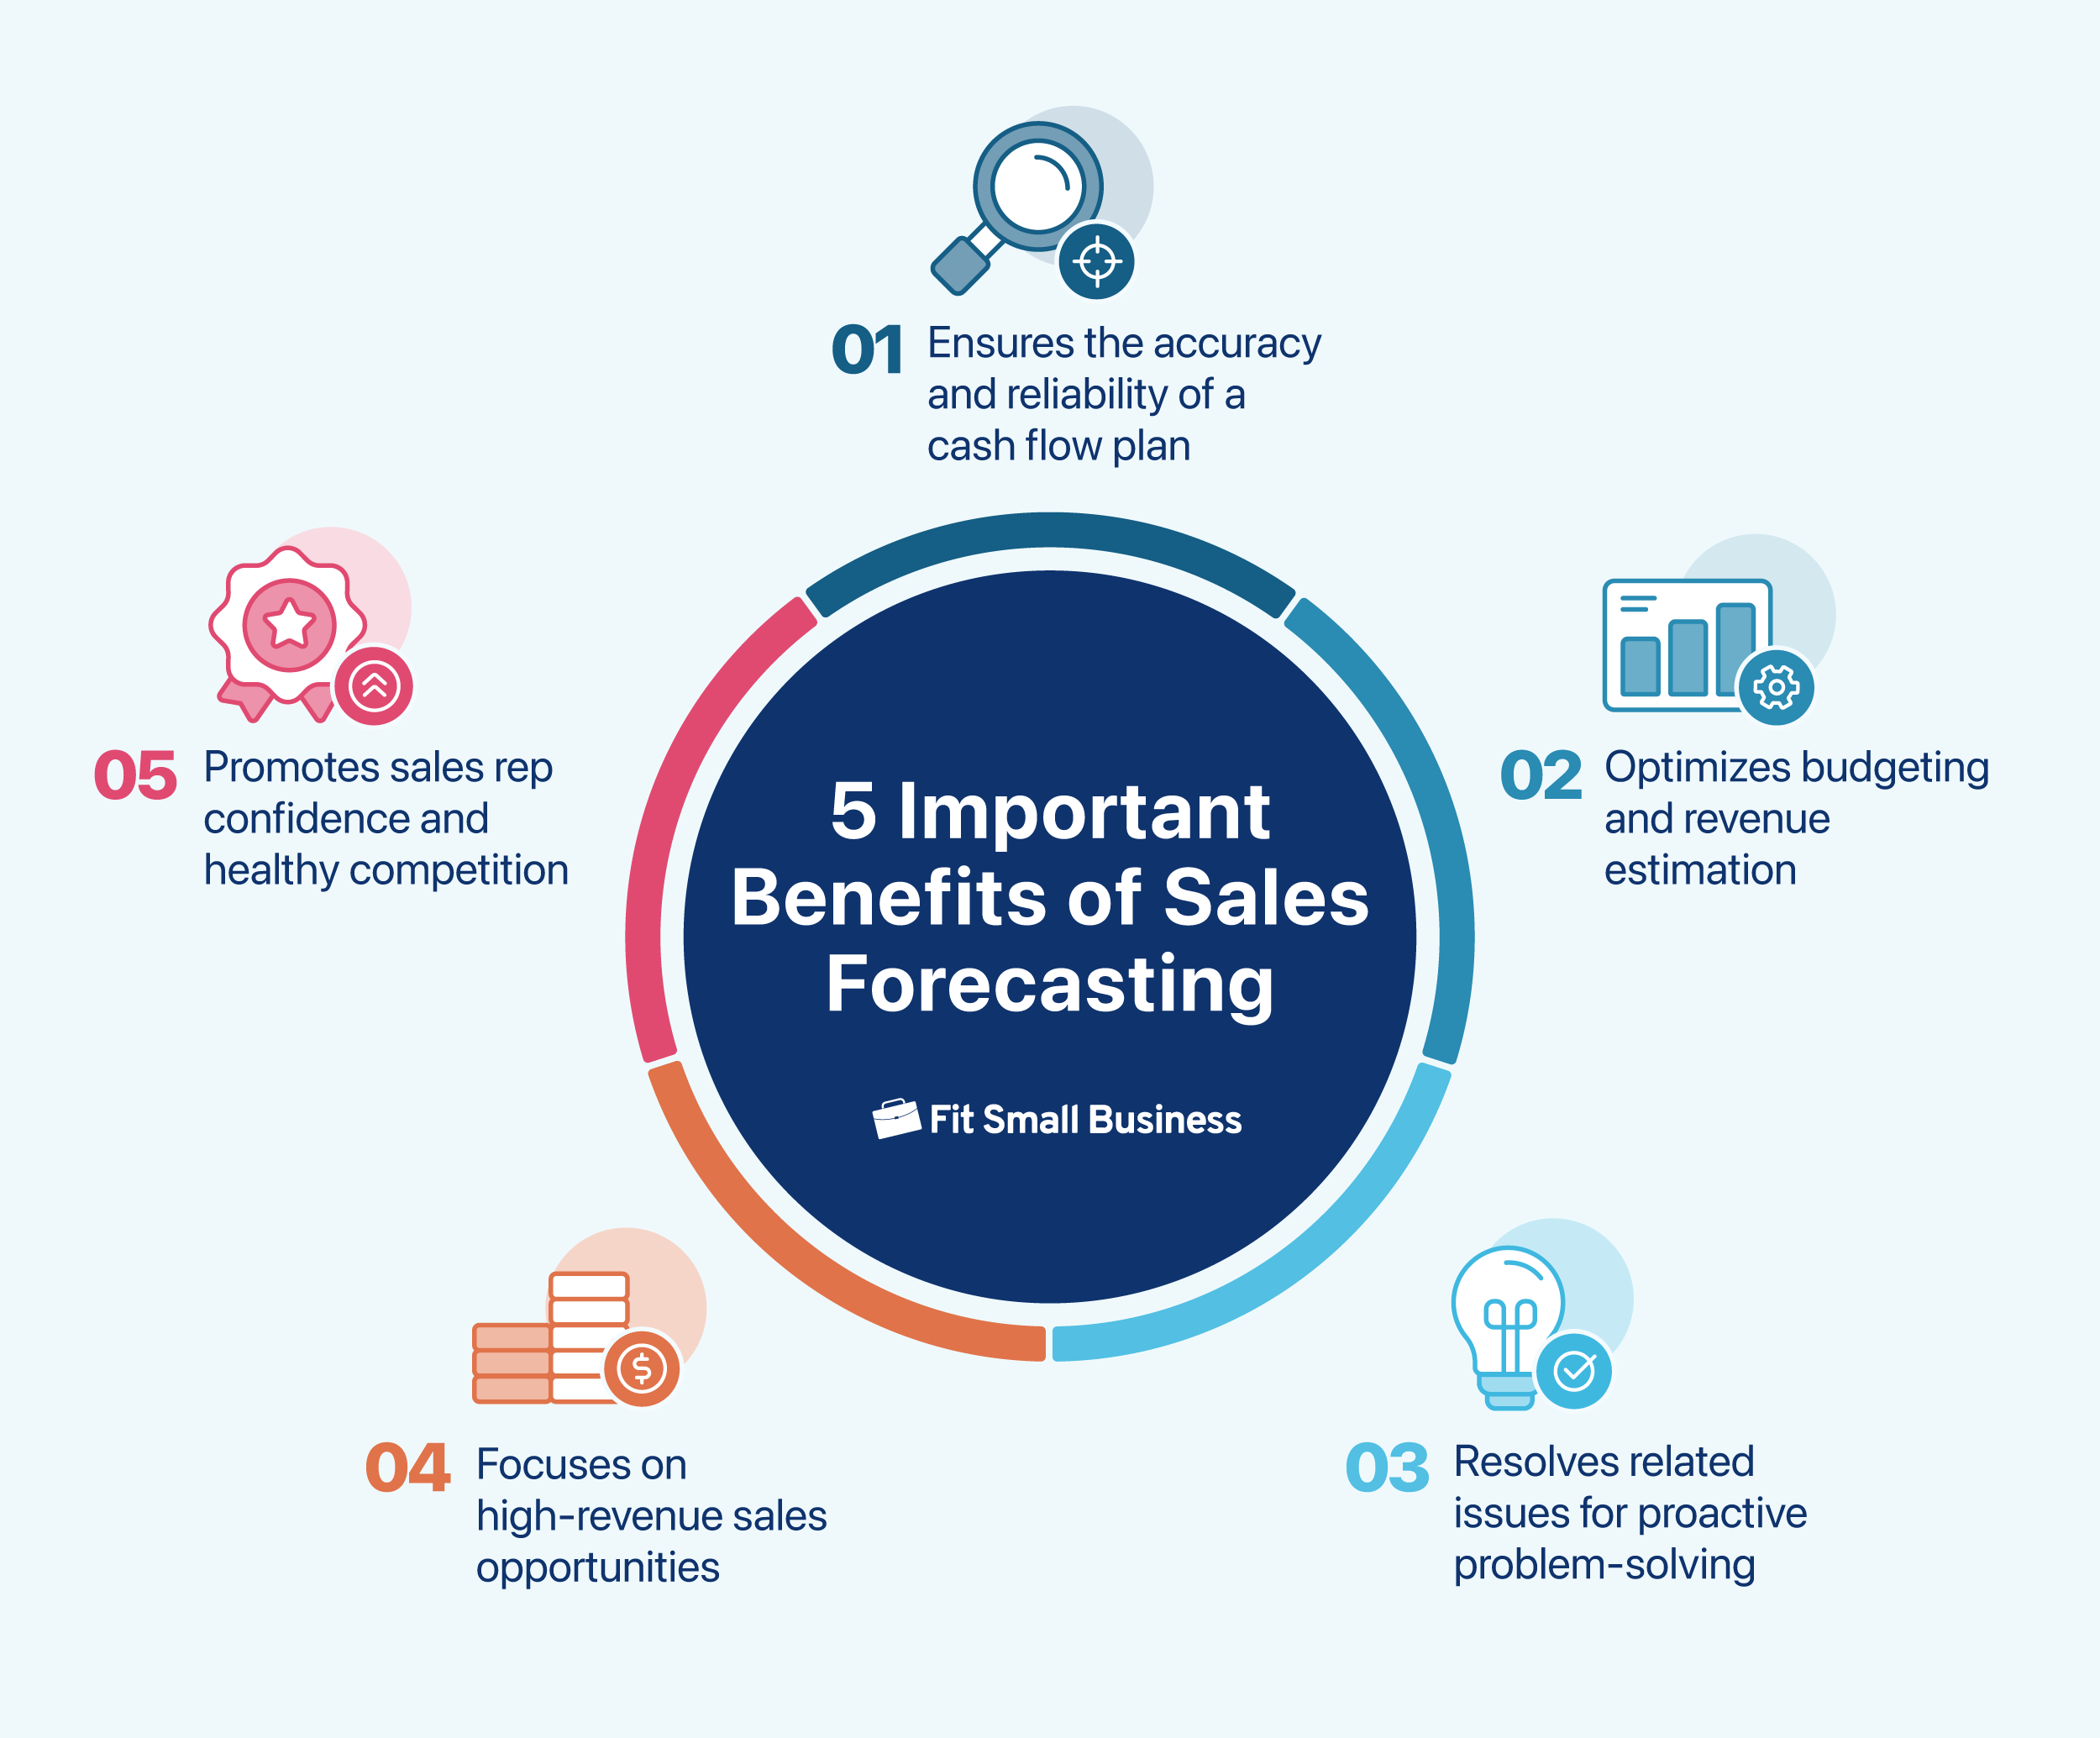 An infographic of the important benefits of sales forecasting